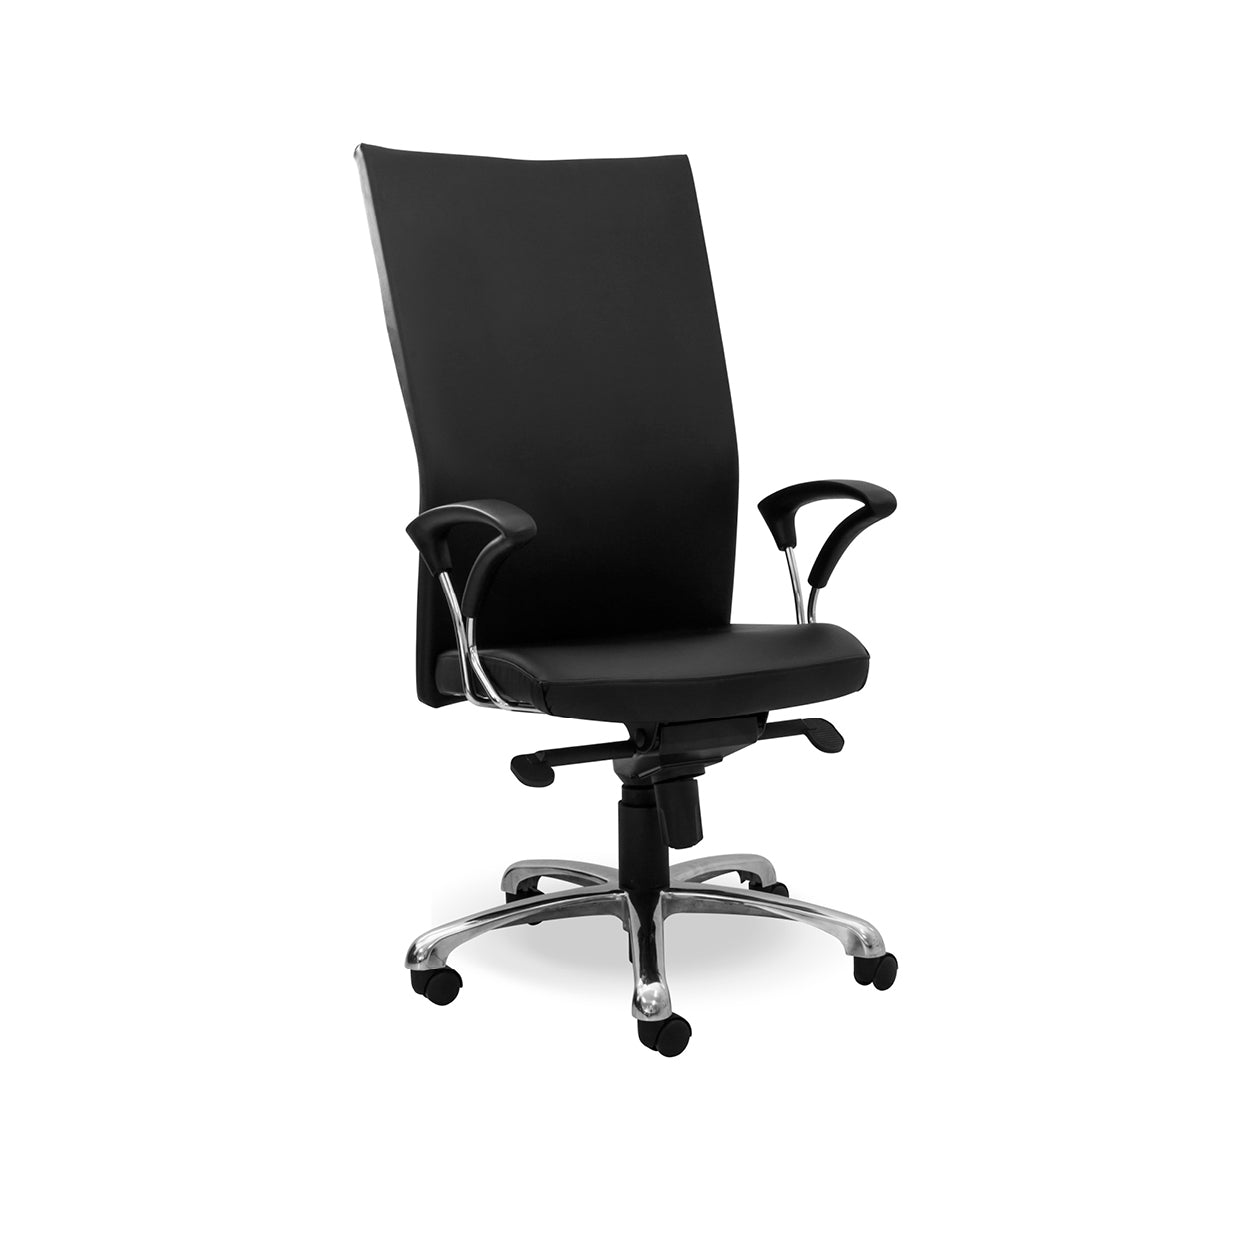 Hedcor Angelo office chair high back